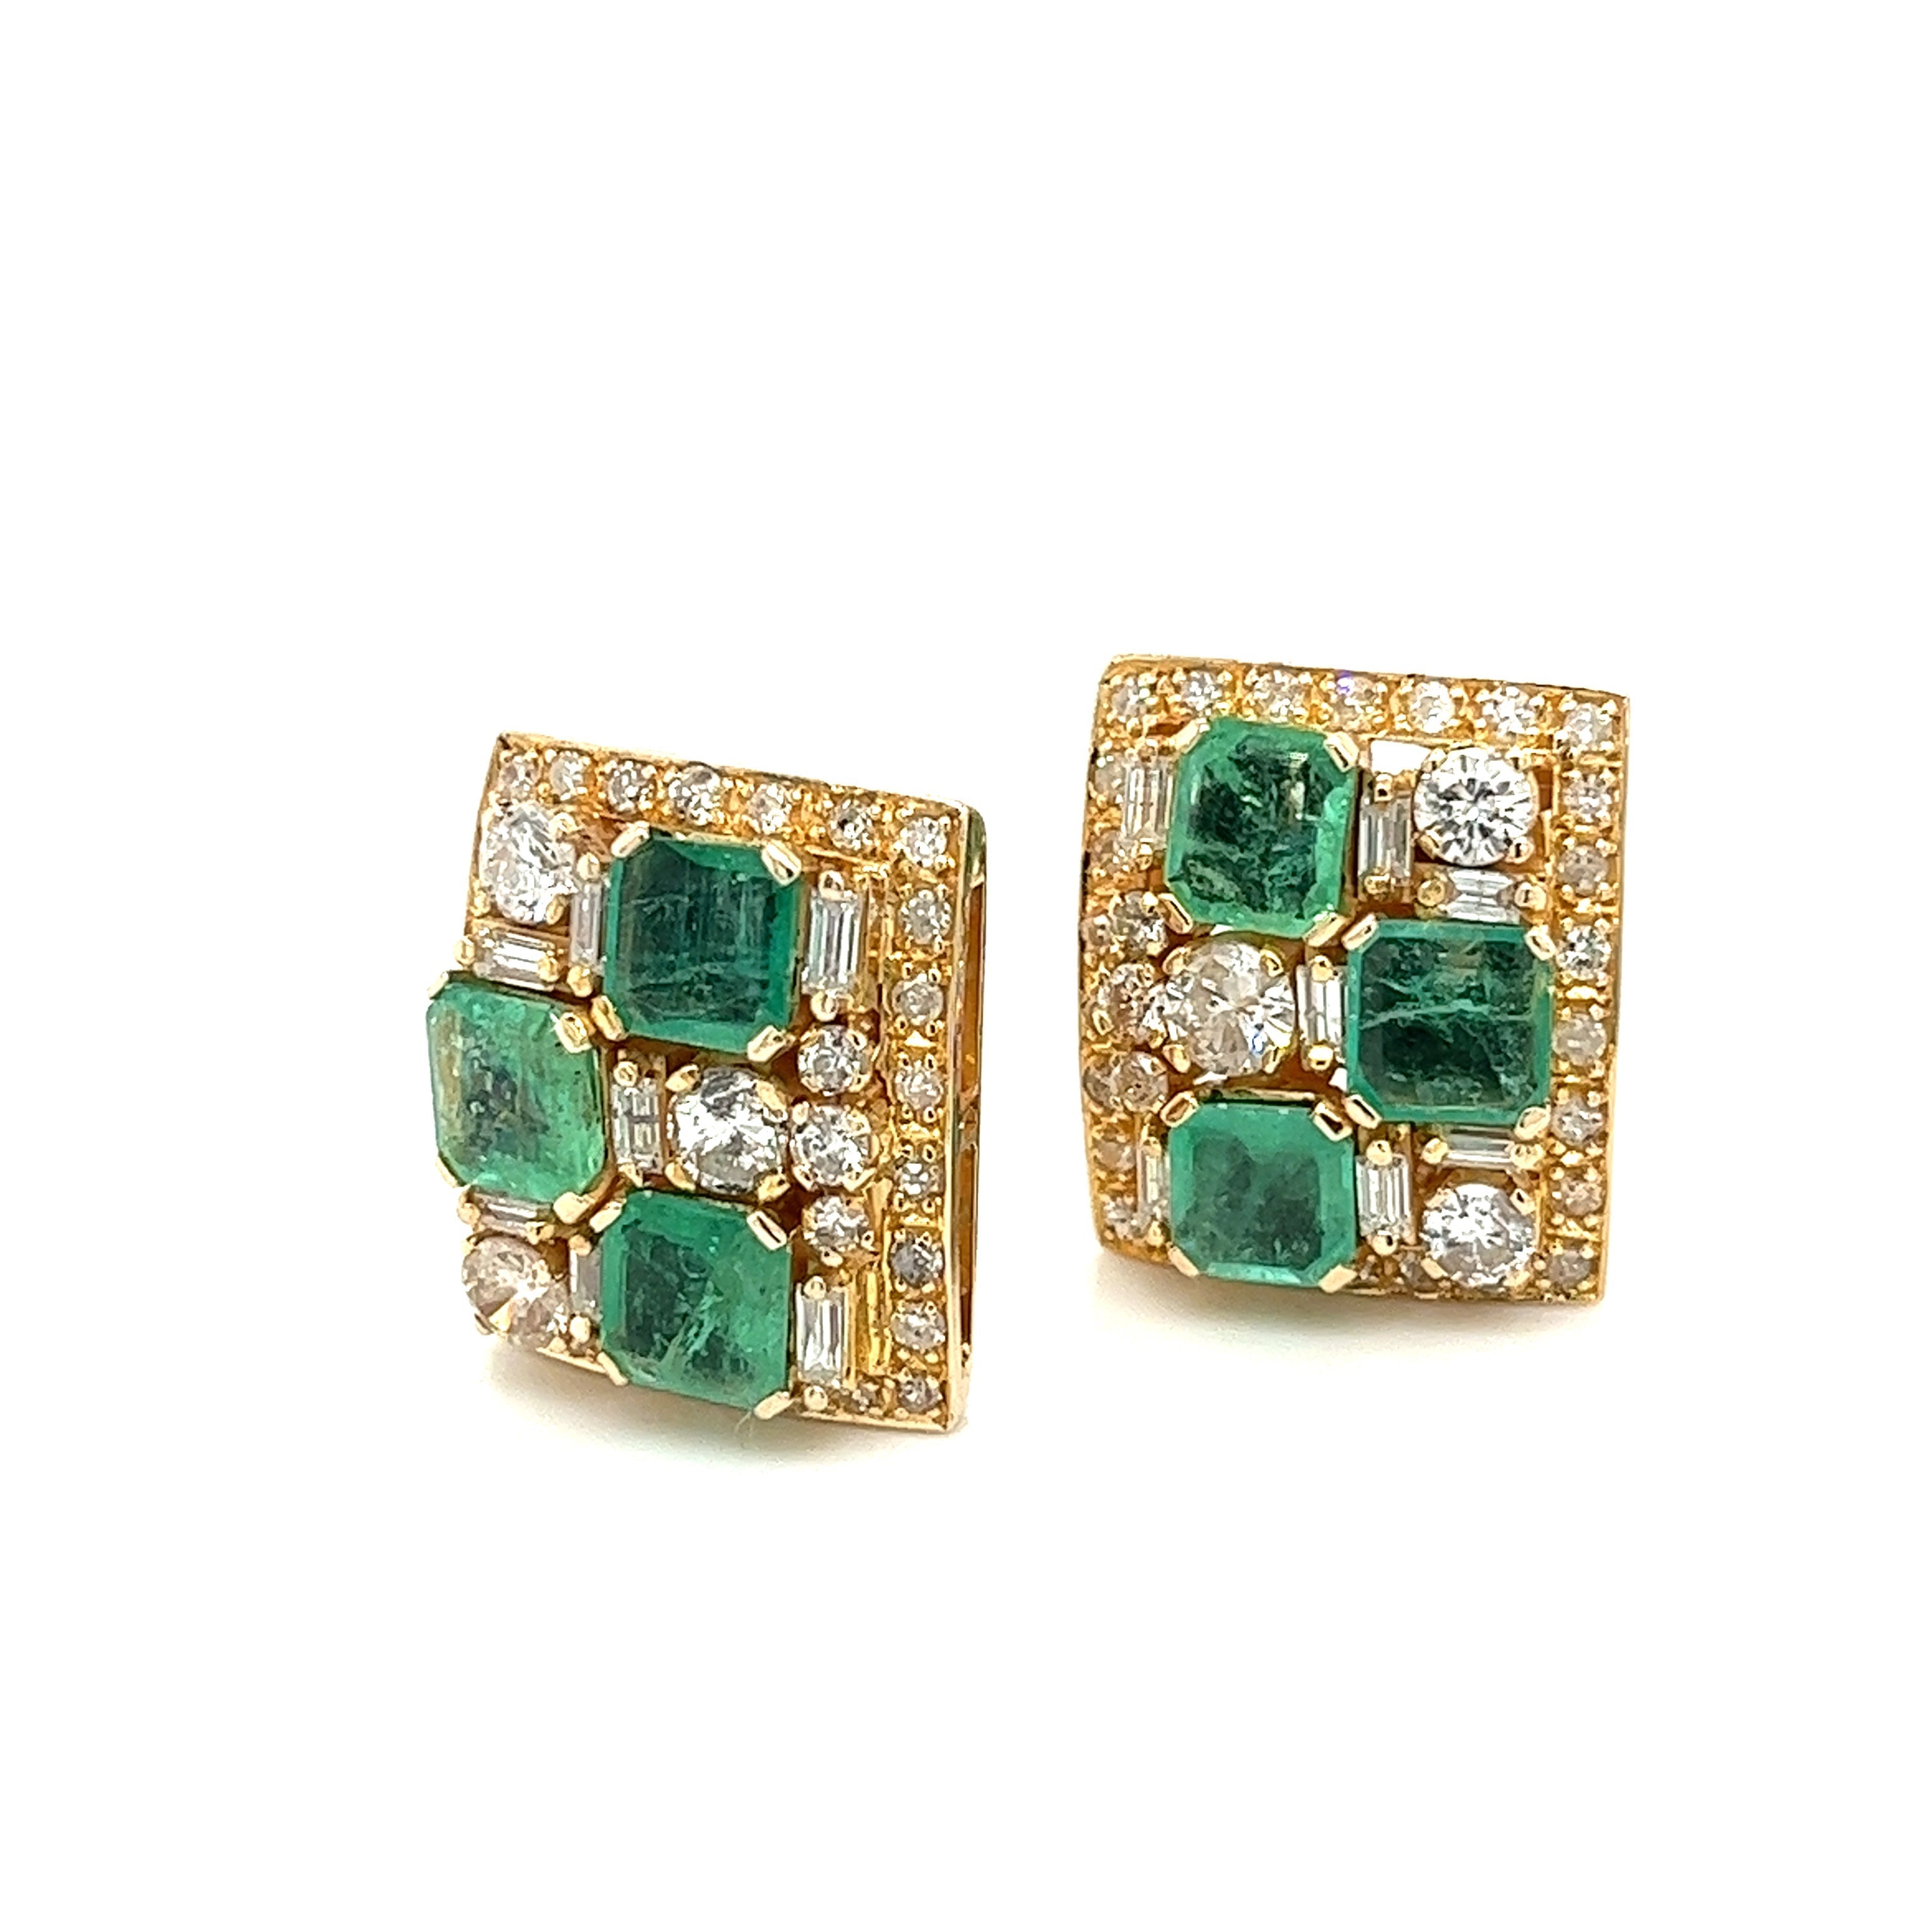 Vintage-Natural-Emerald-Diamond-Earring-and-Ring-Jewelry-Set-in-18K-Gold-Jewelery-Sets-2.jpg